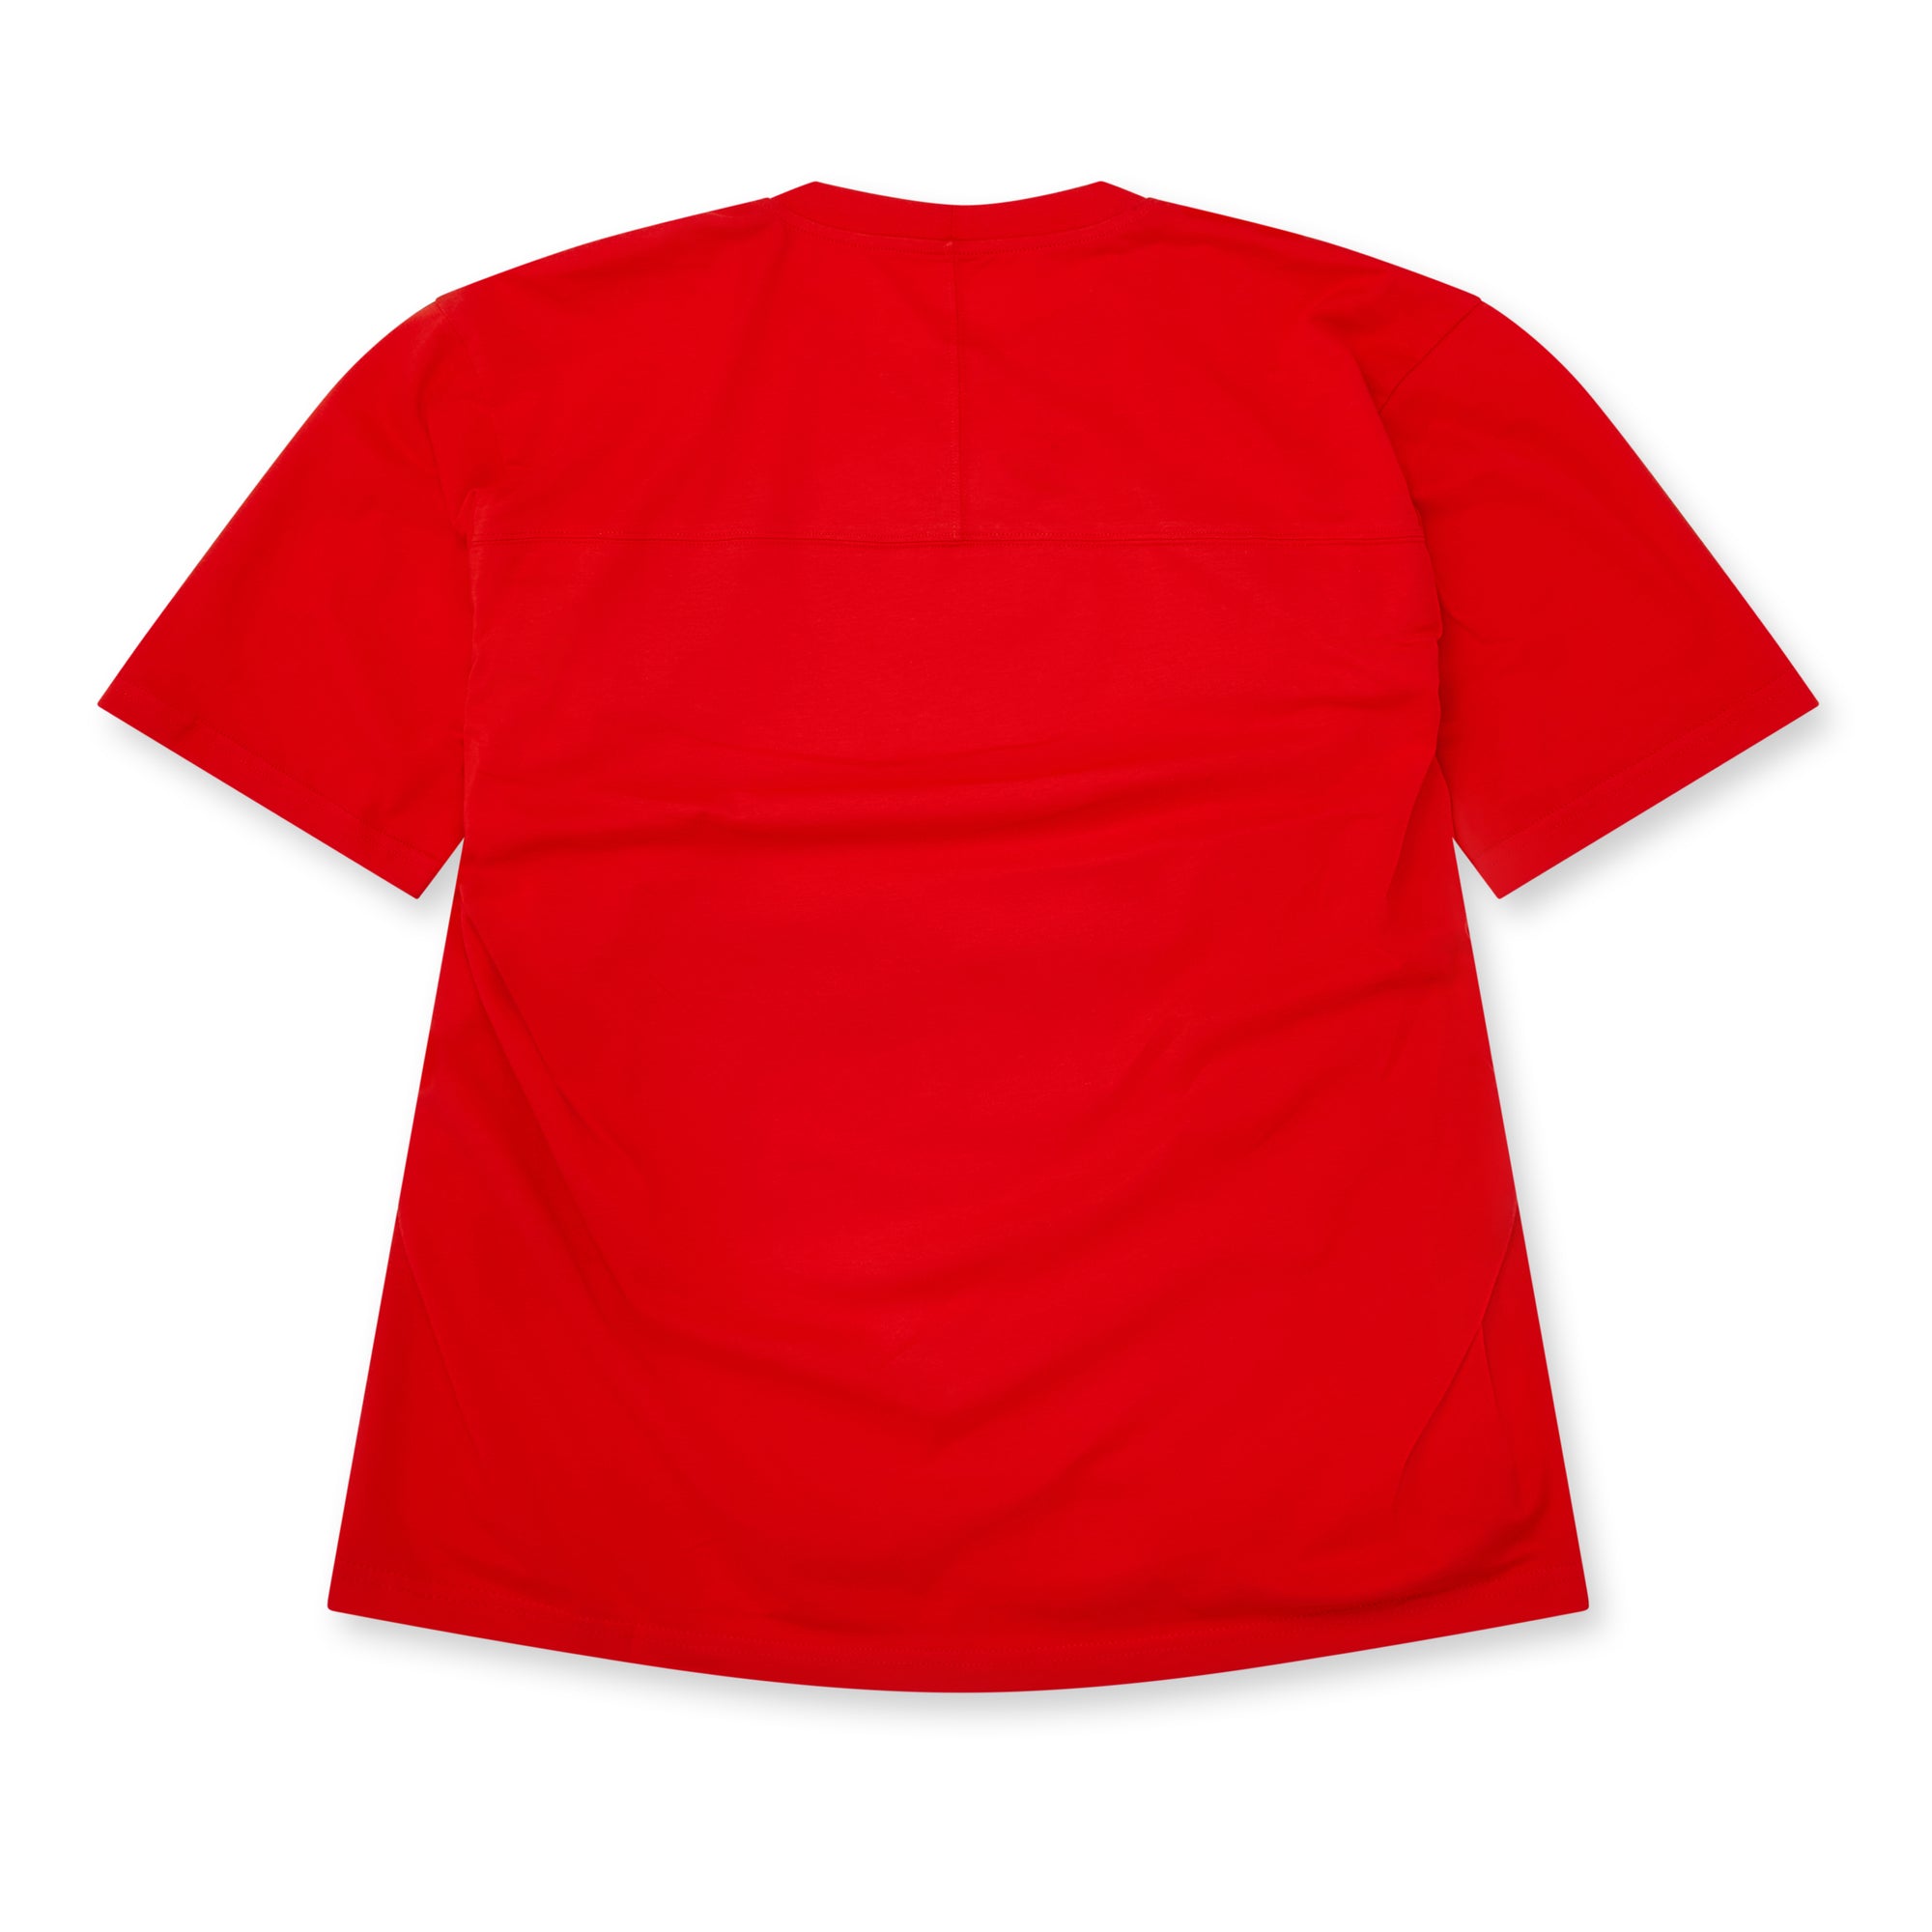 Martine Rose - Men’s Pulled Neck T-Shirt - (Red) view 2